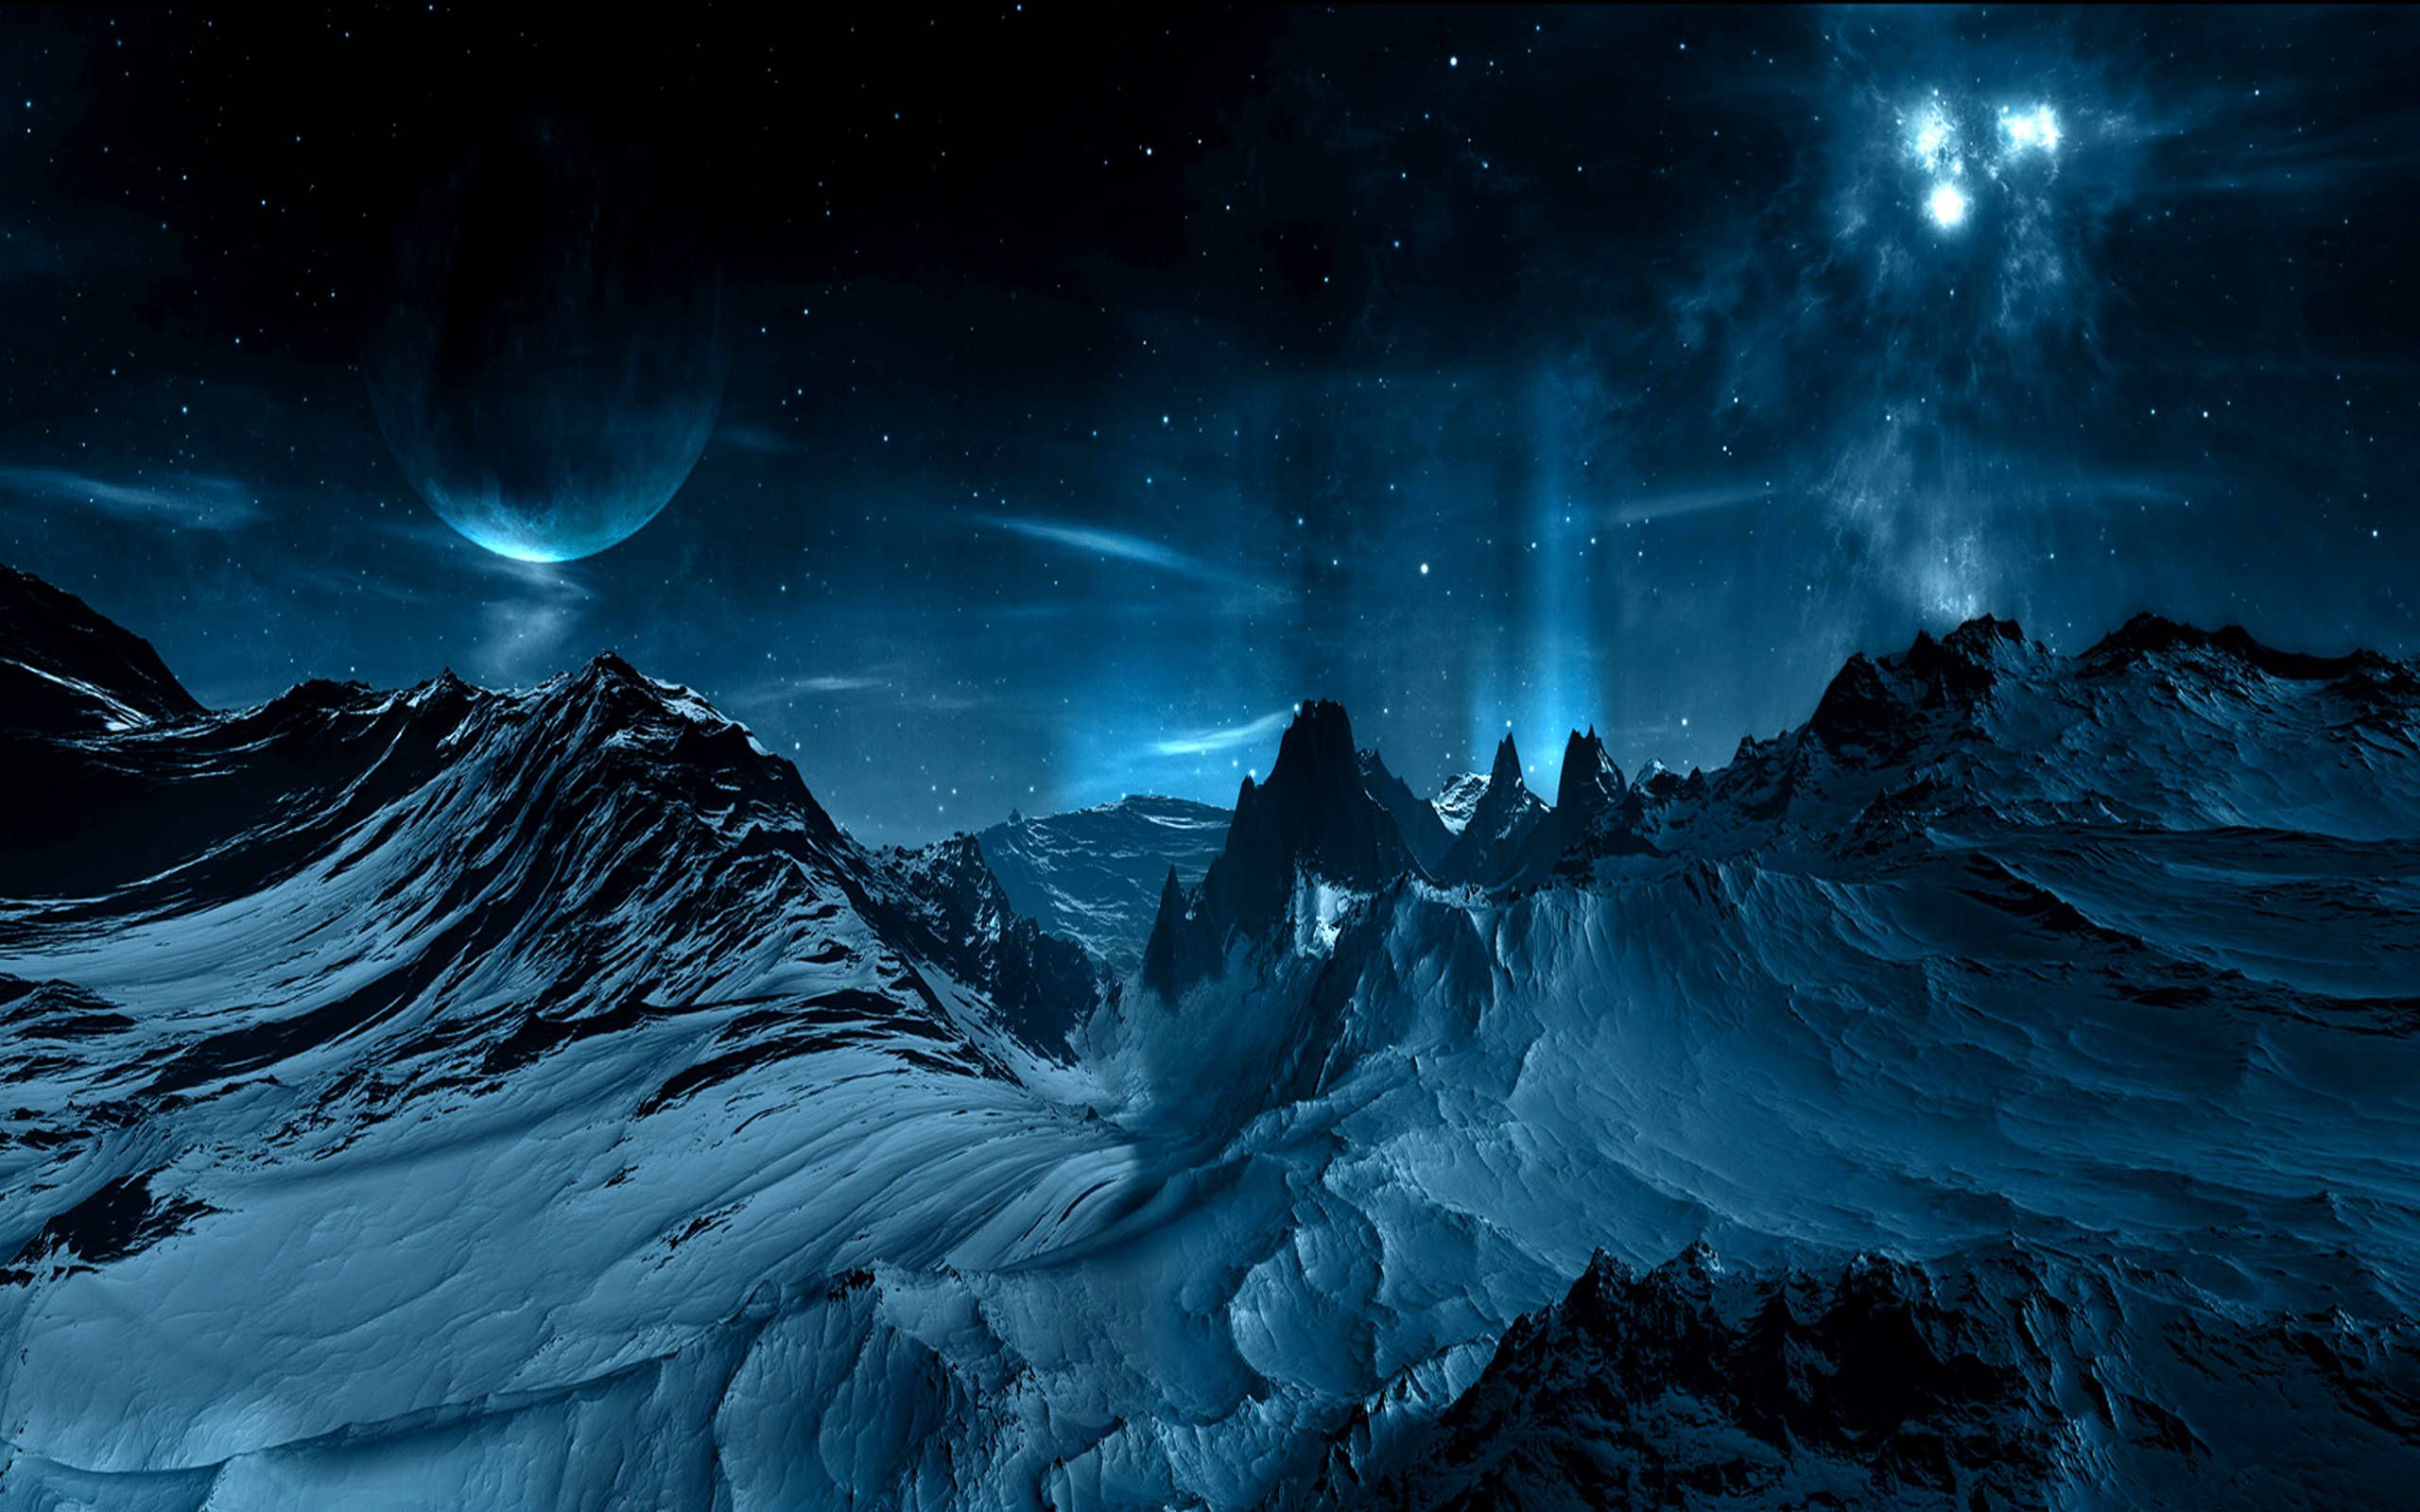 A night sky with mountains and stars - Landscape